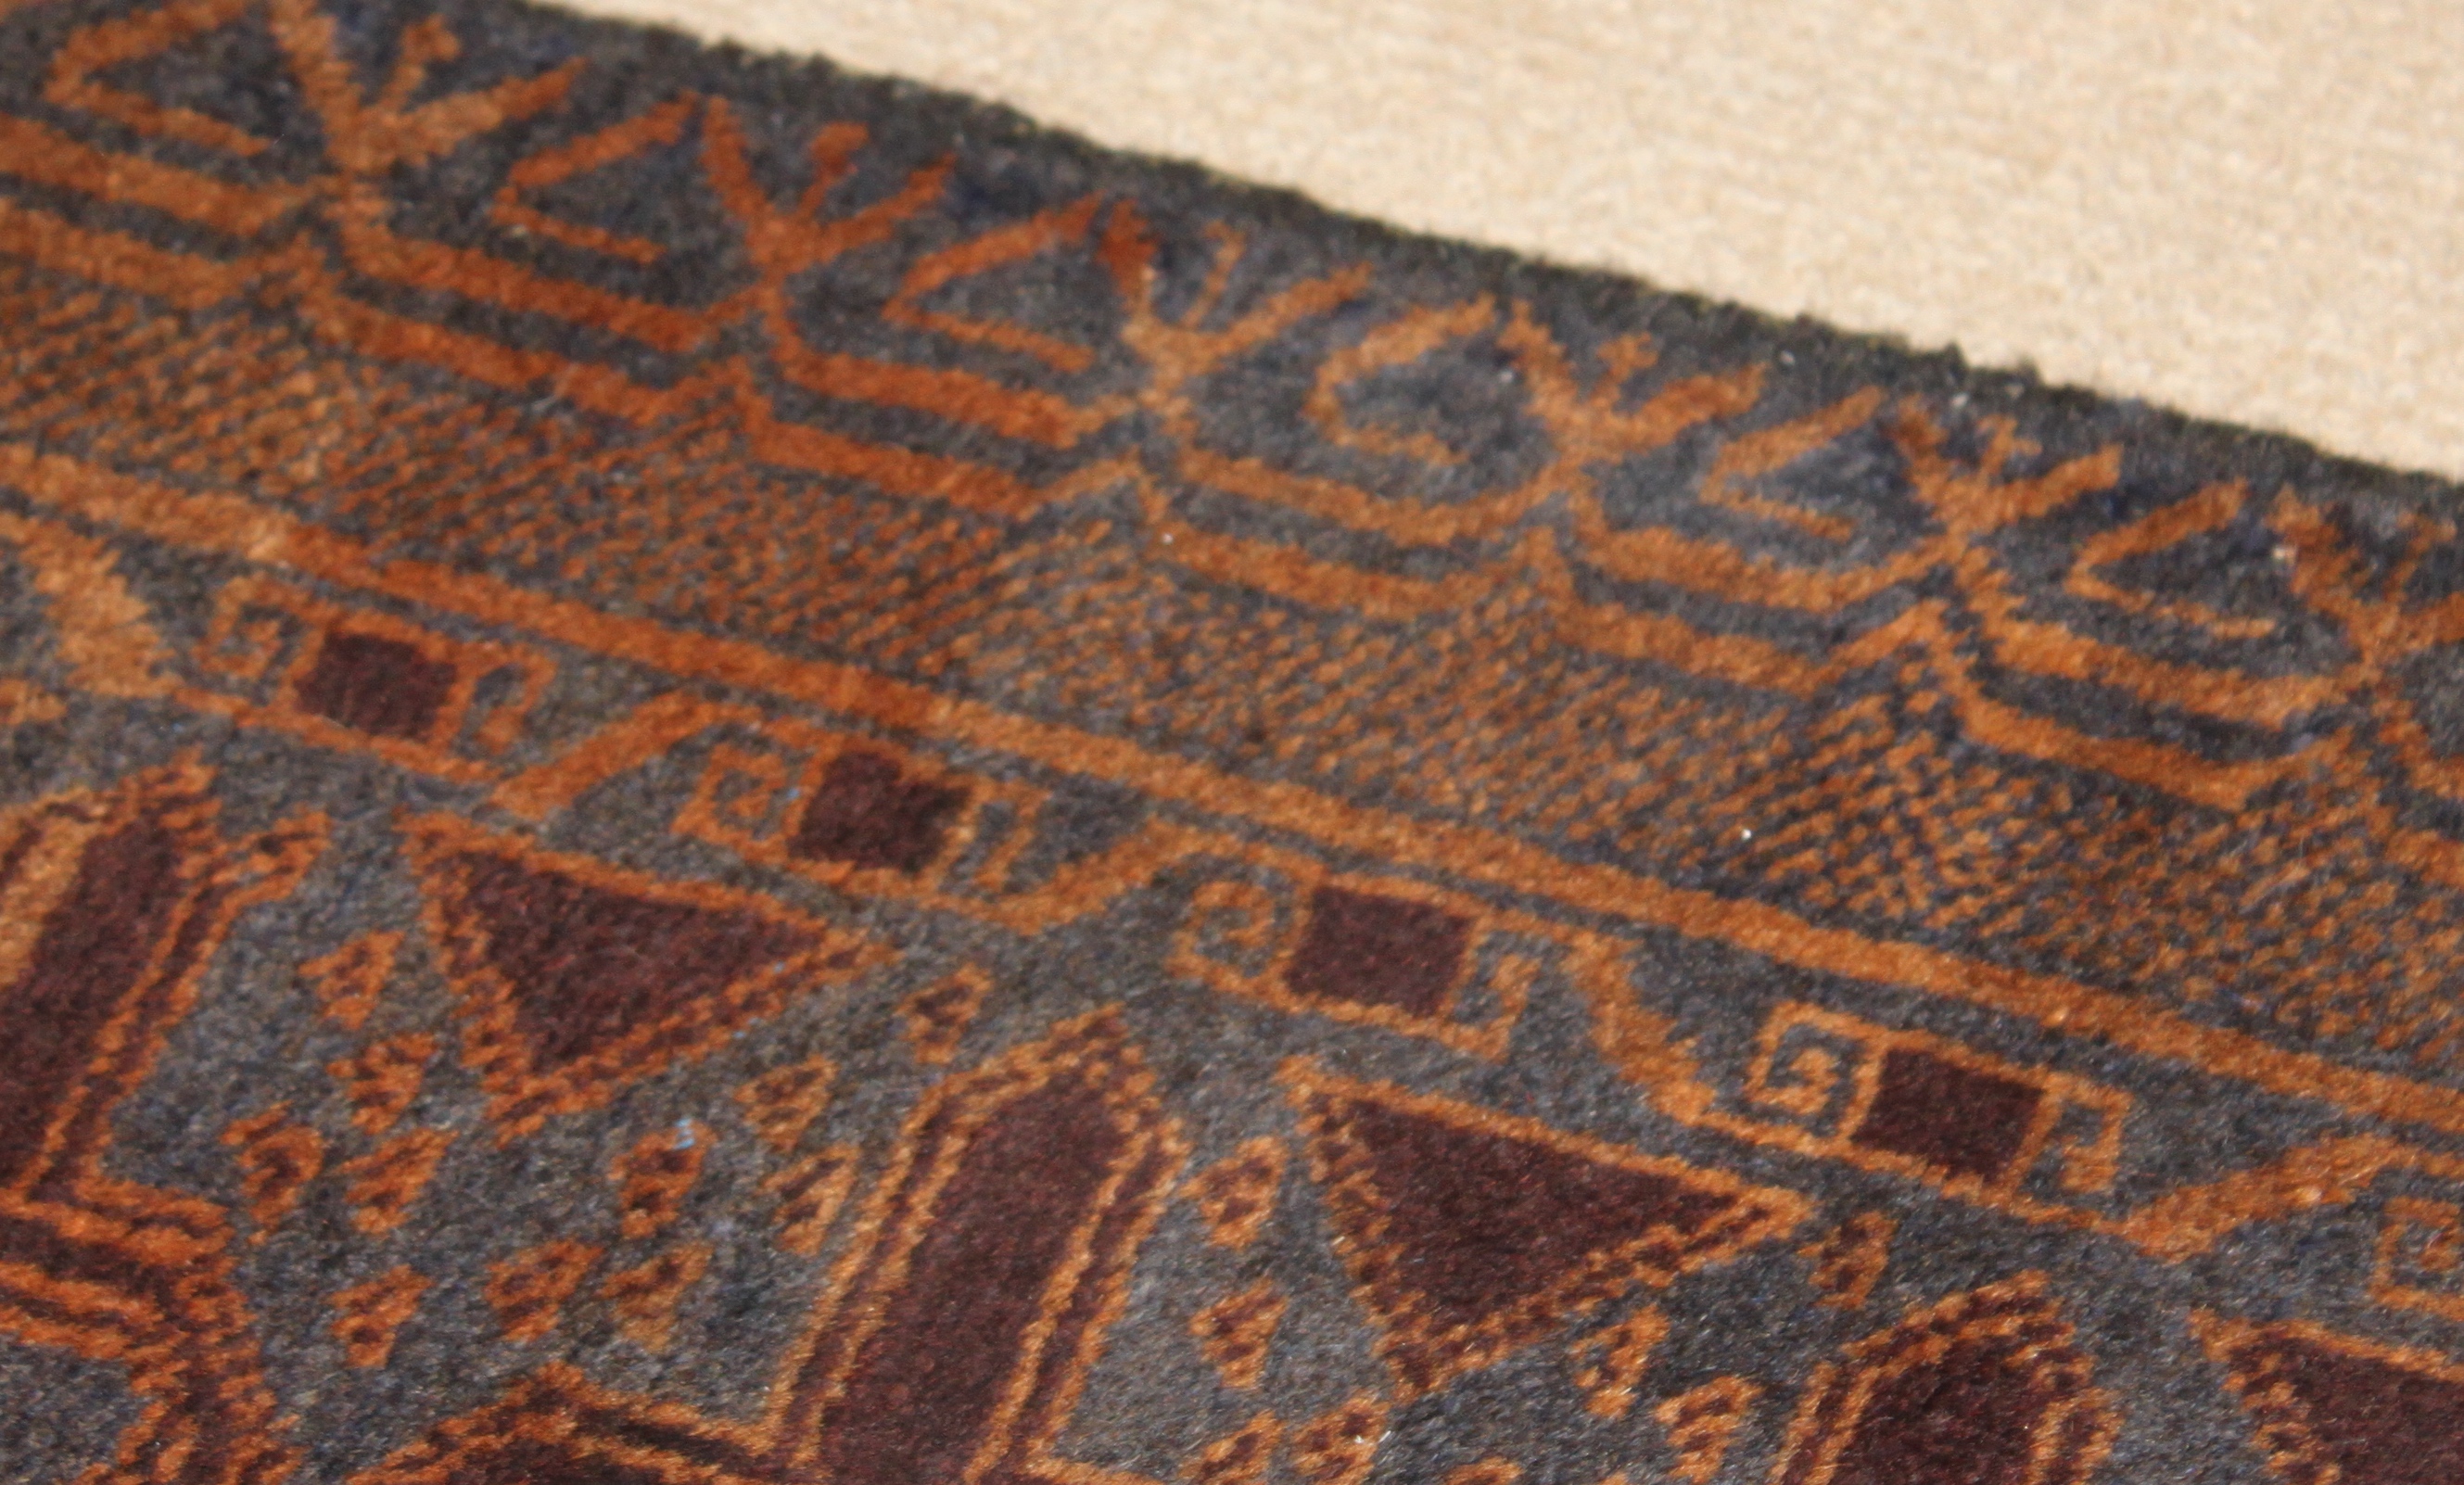 A rug with a blue background and orange and brown geometric patterns is photographed close up. Minor variations in the indigo color illustrate the variation called abrash.